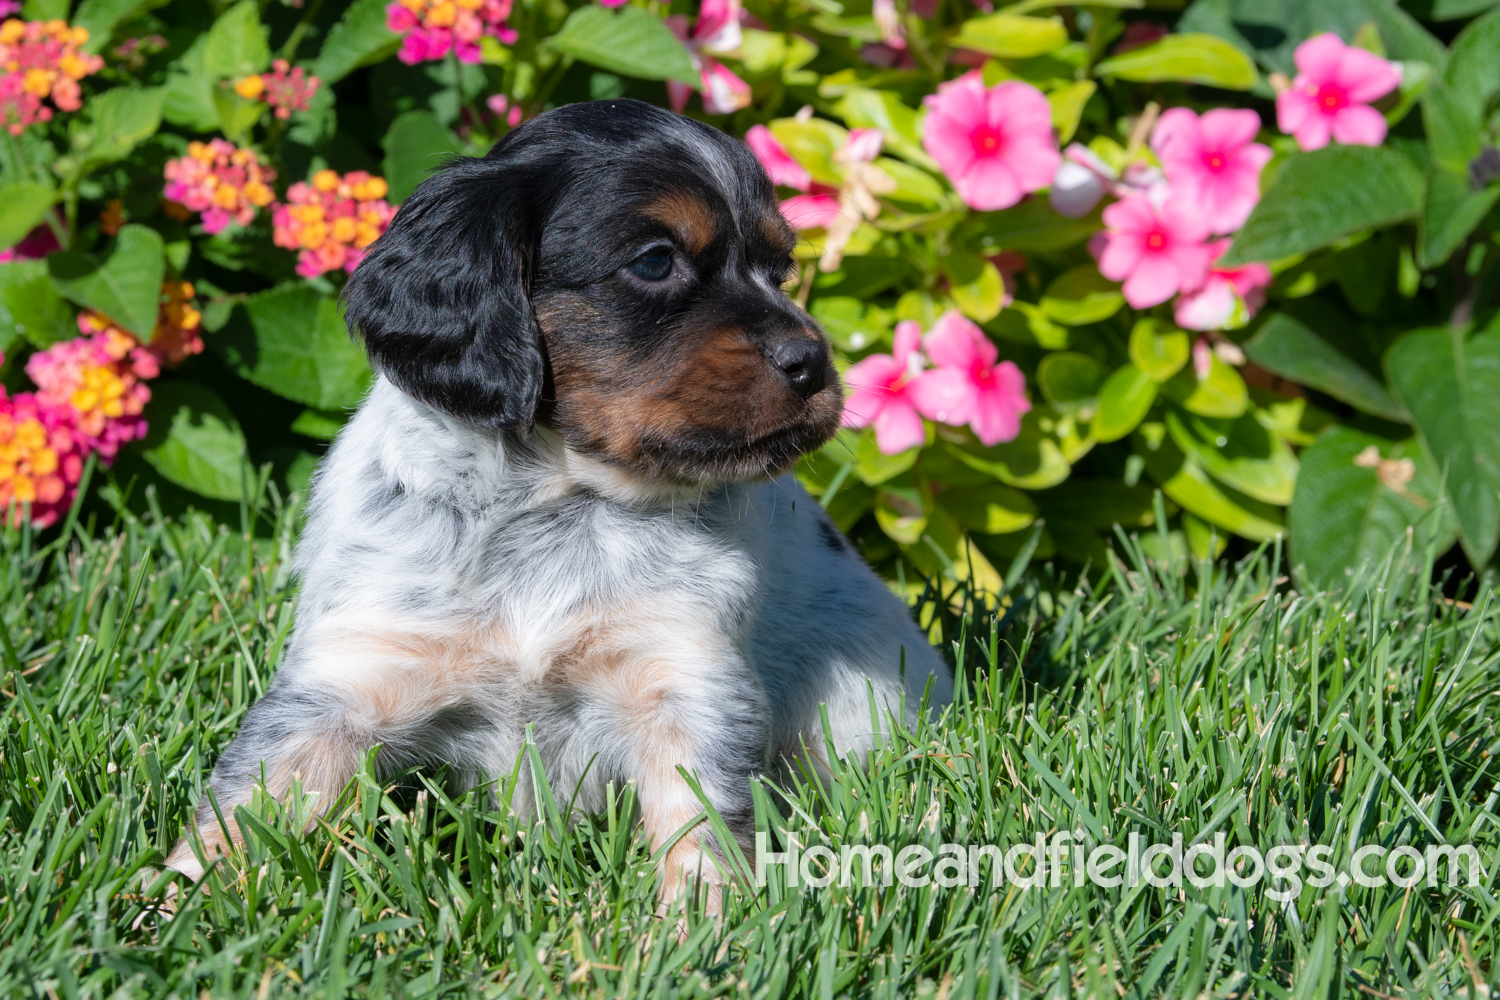 Pictures of adorable french brittany puppies in front of flowers.